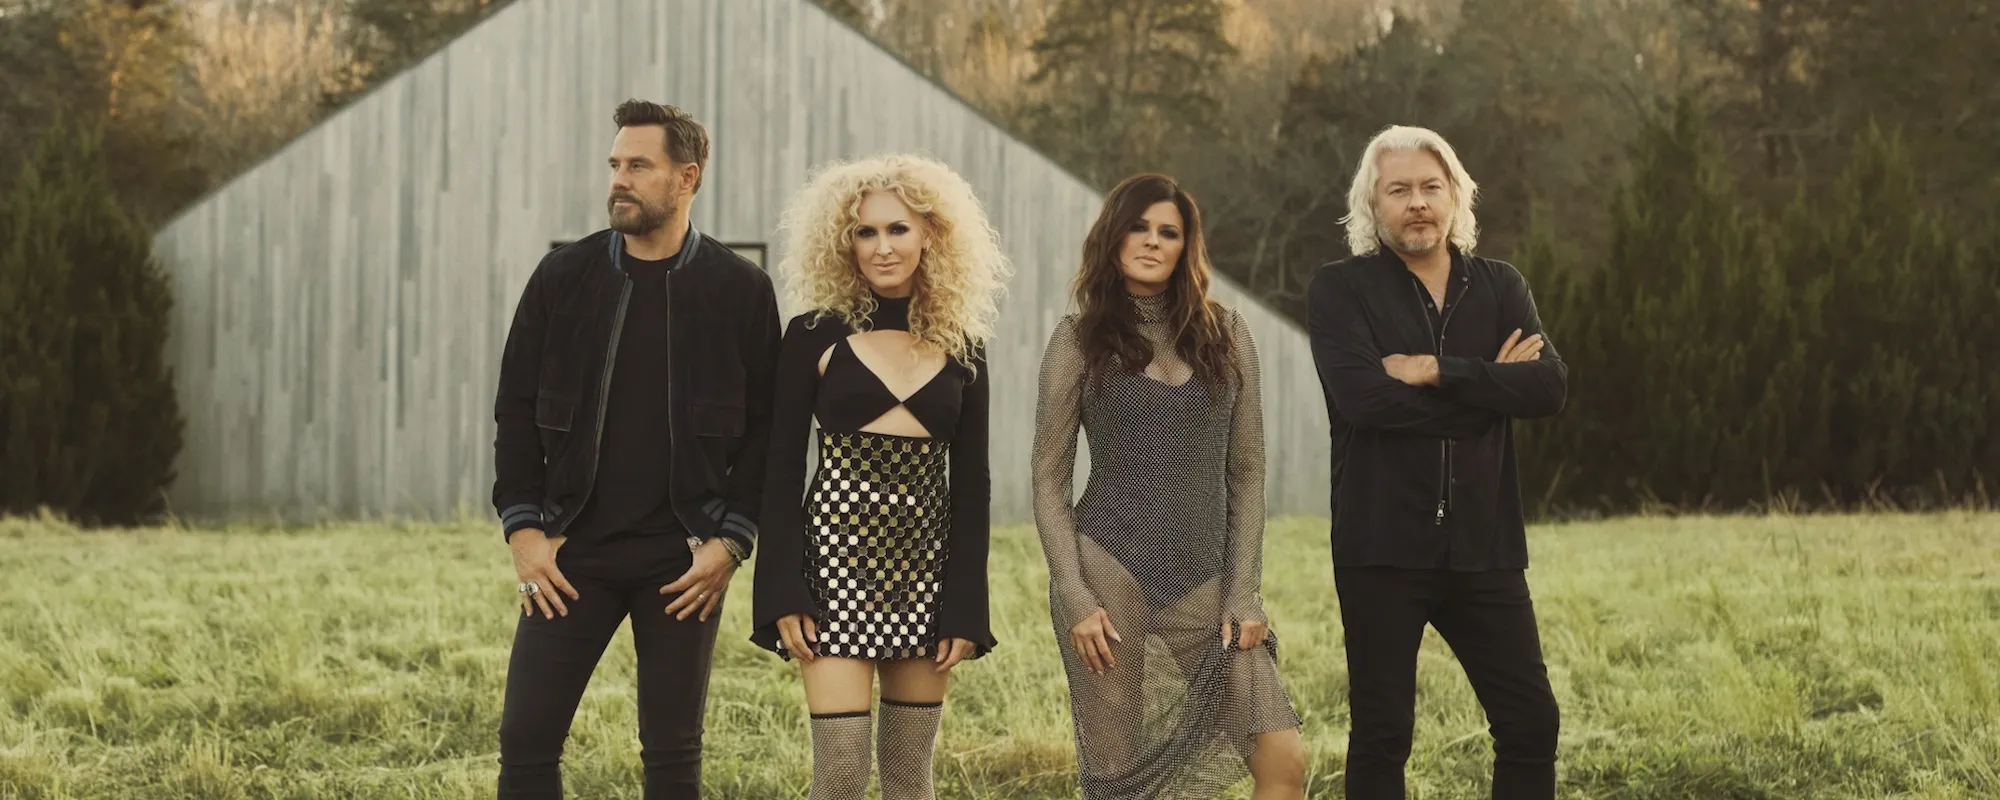 Who Wrote “Better Man” By Little Big Town?